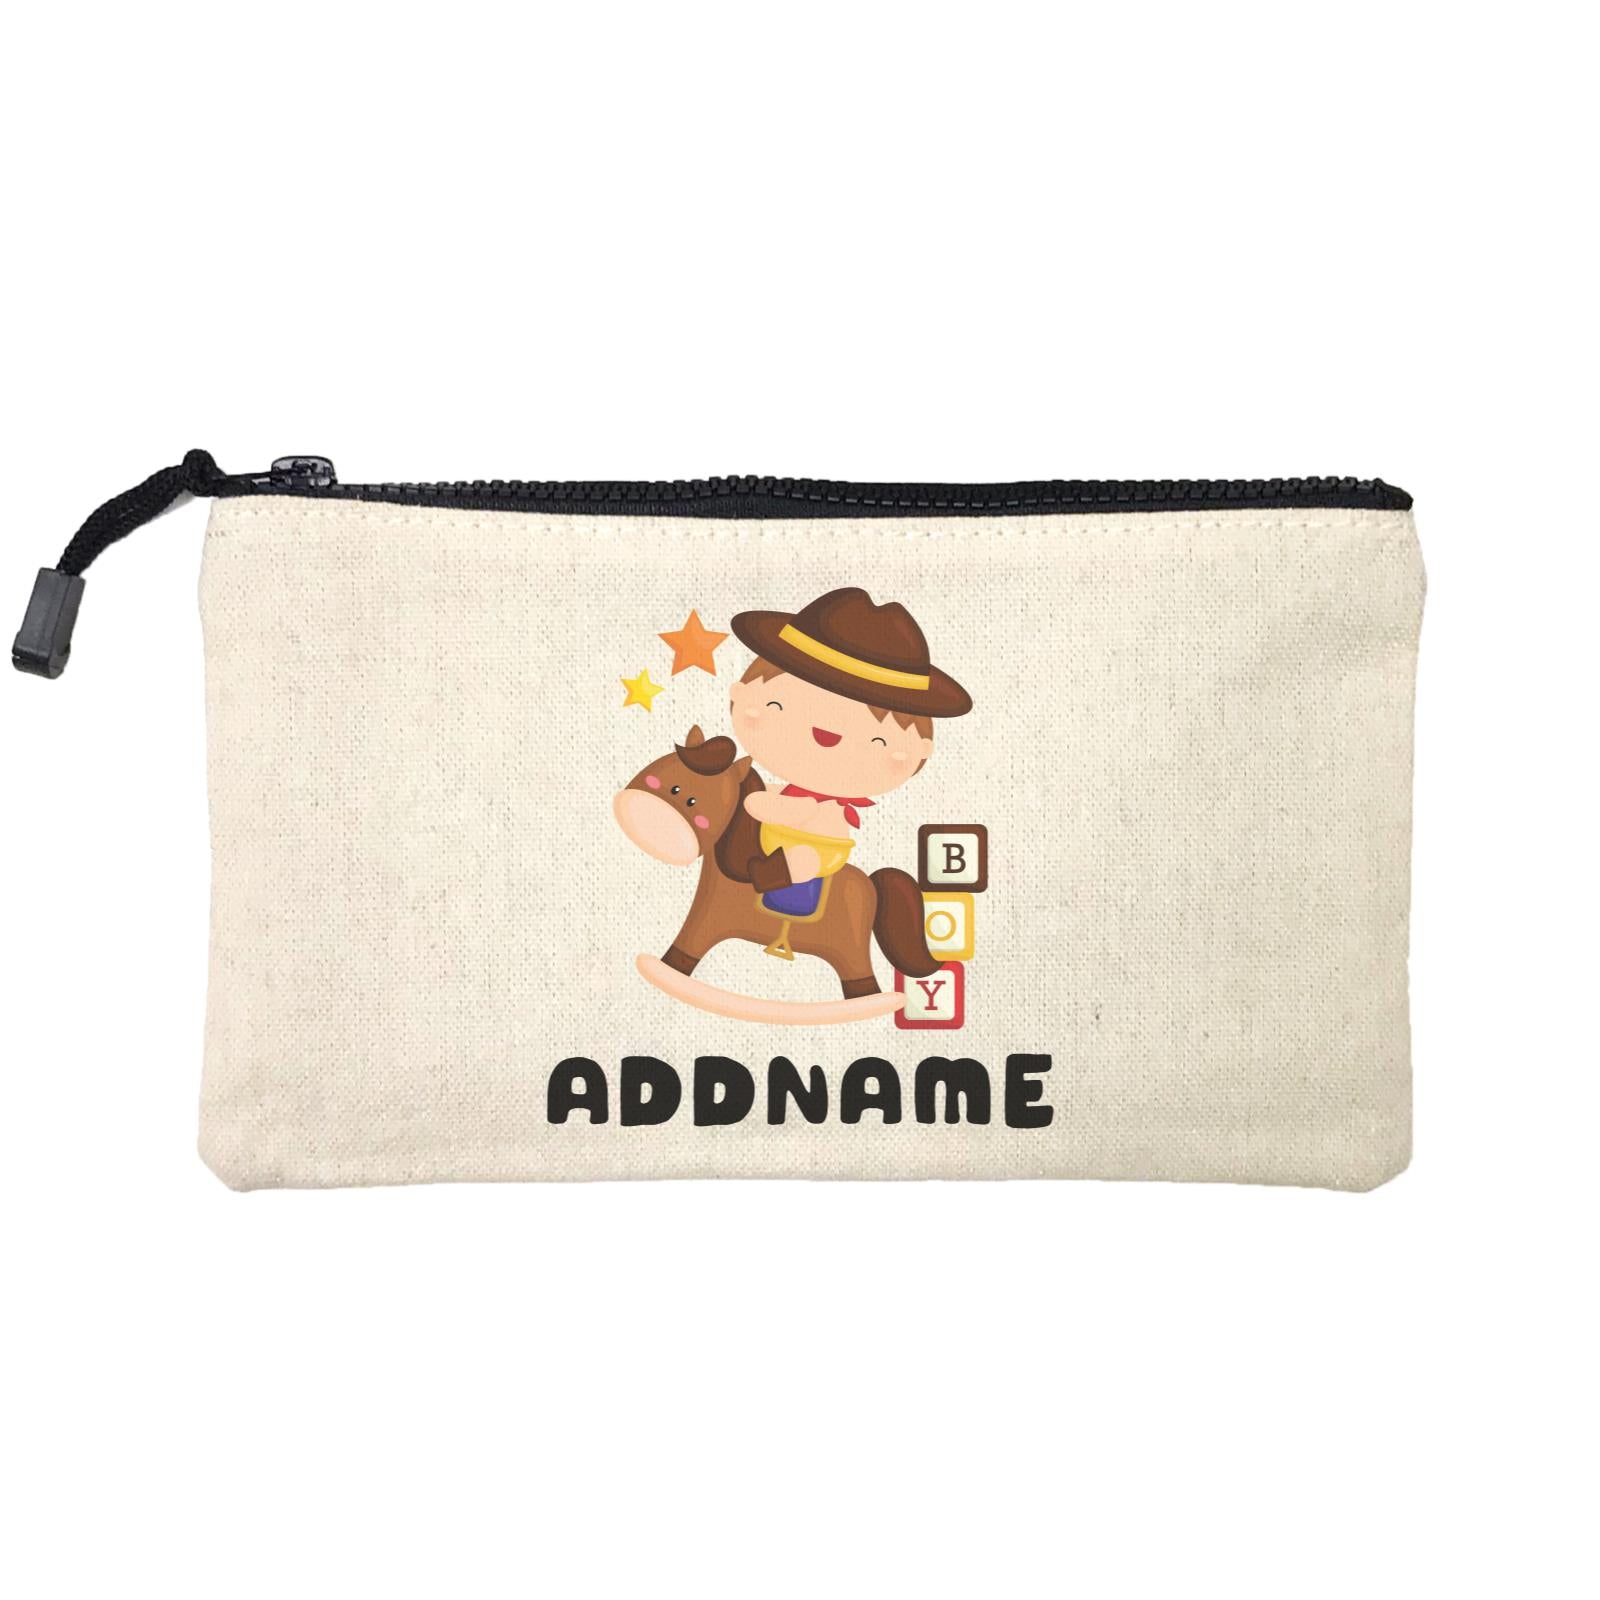 Birthday Cowboy Style Little Cowboy Playing Toy Horse Addname Mini Accessories Stationery Pouch